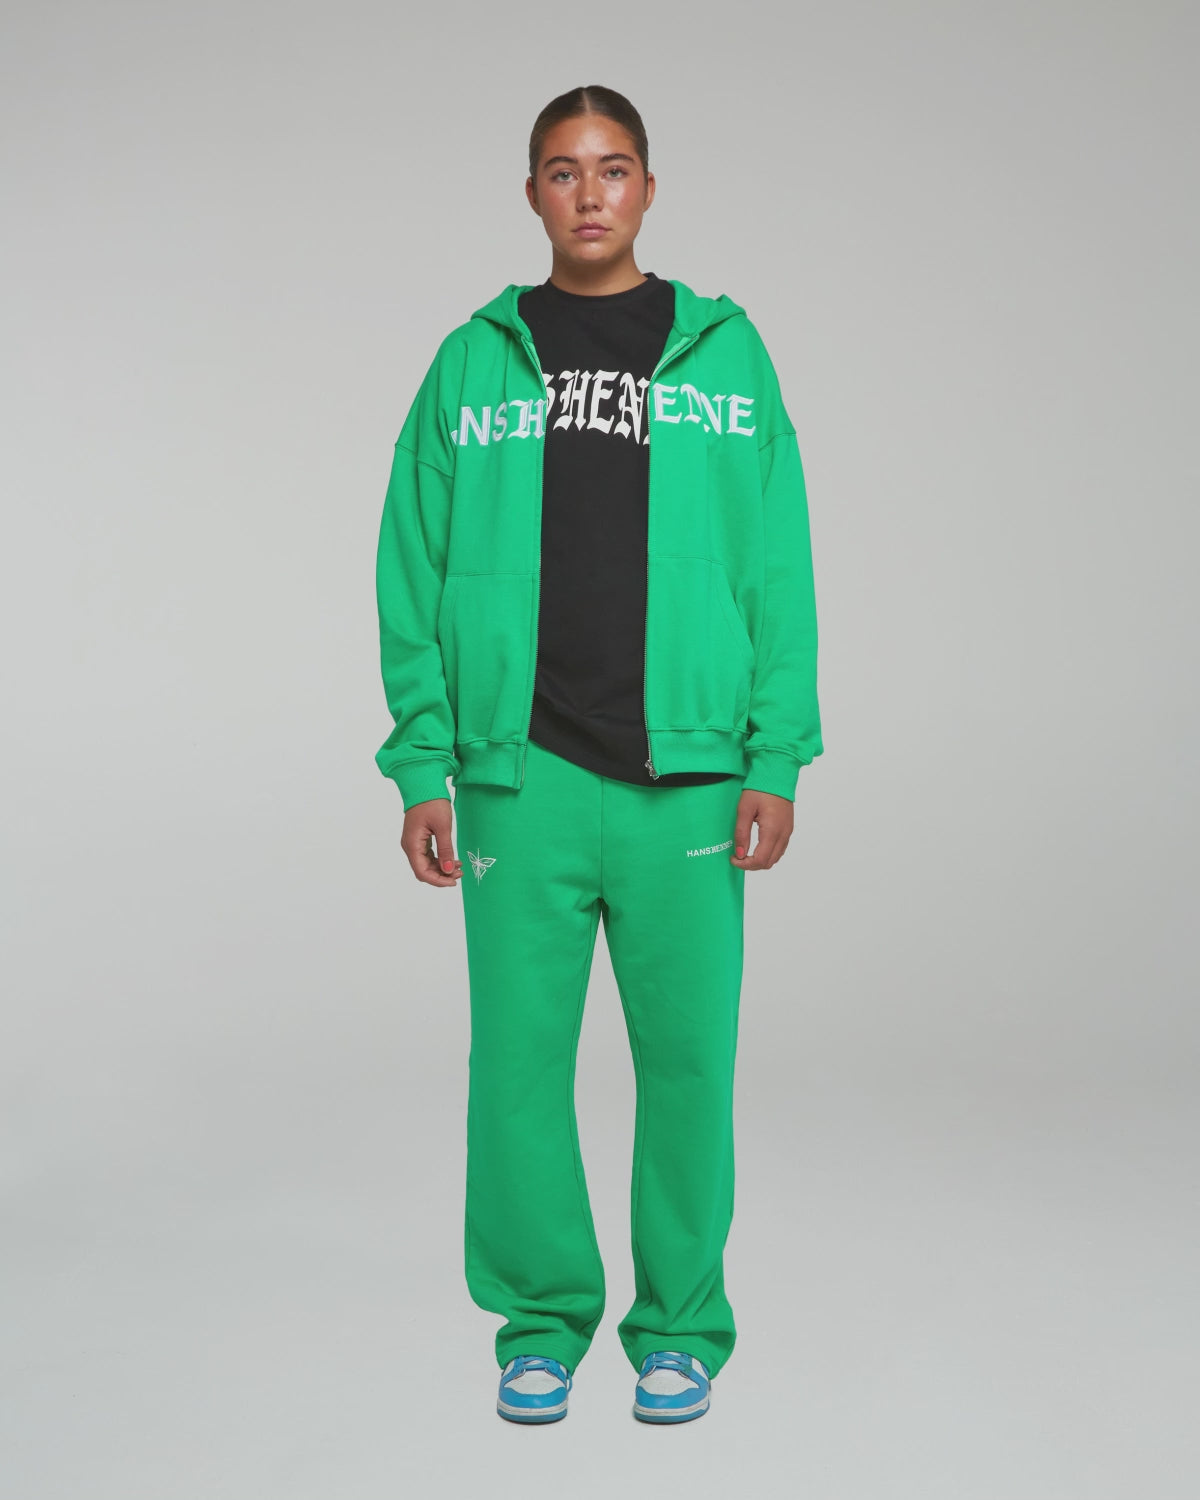 HANSHENNES - Green Sweatpant - Heavyweight Jogger - French Terry Cotton